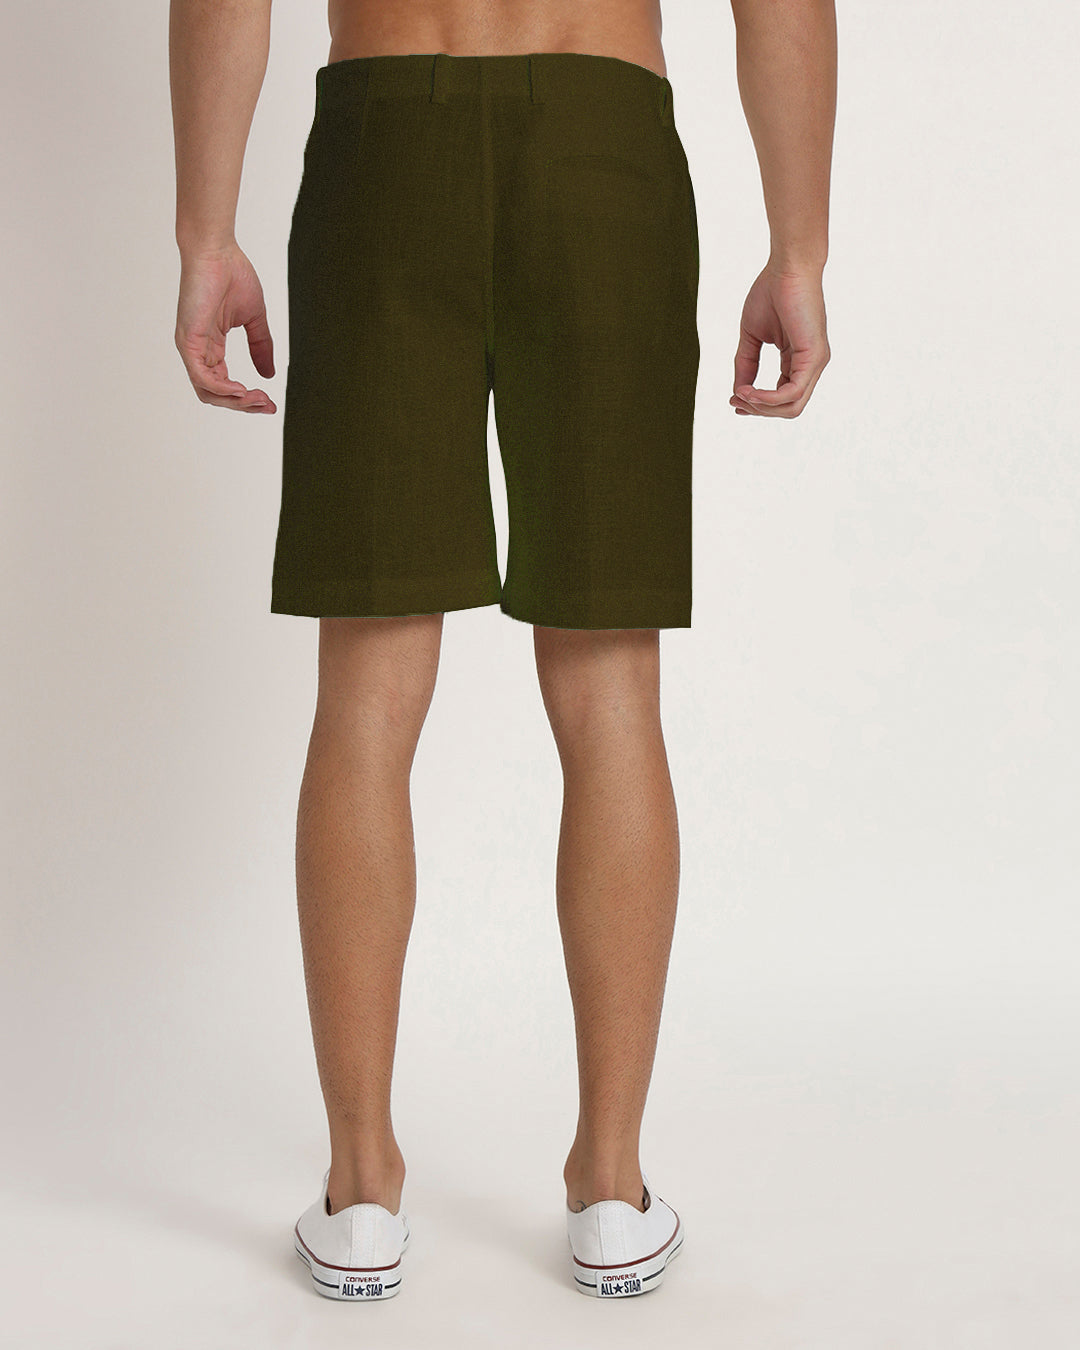 Ready For Anything Olive Green Men's Shorts